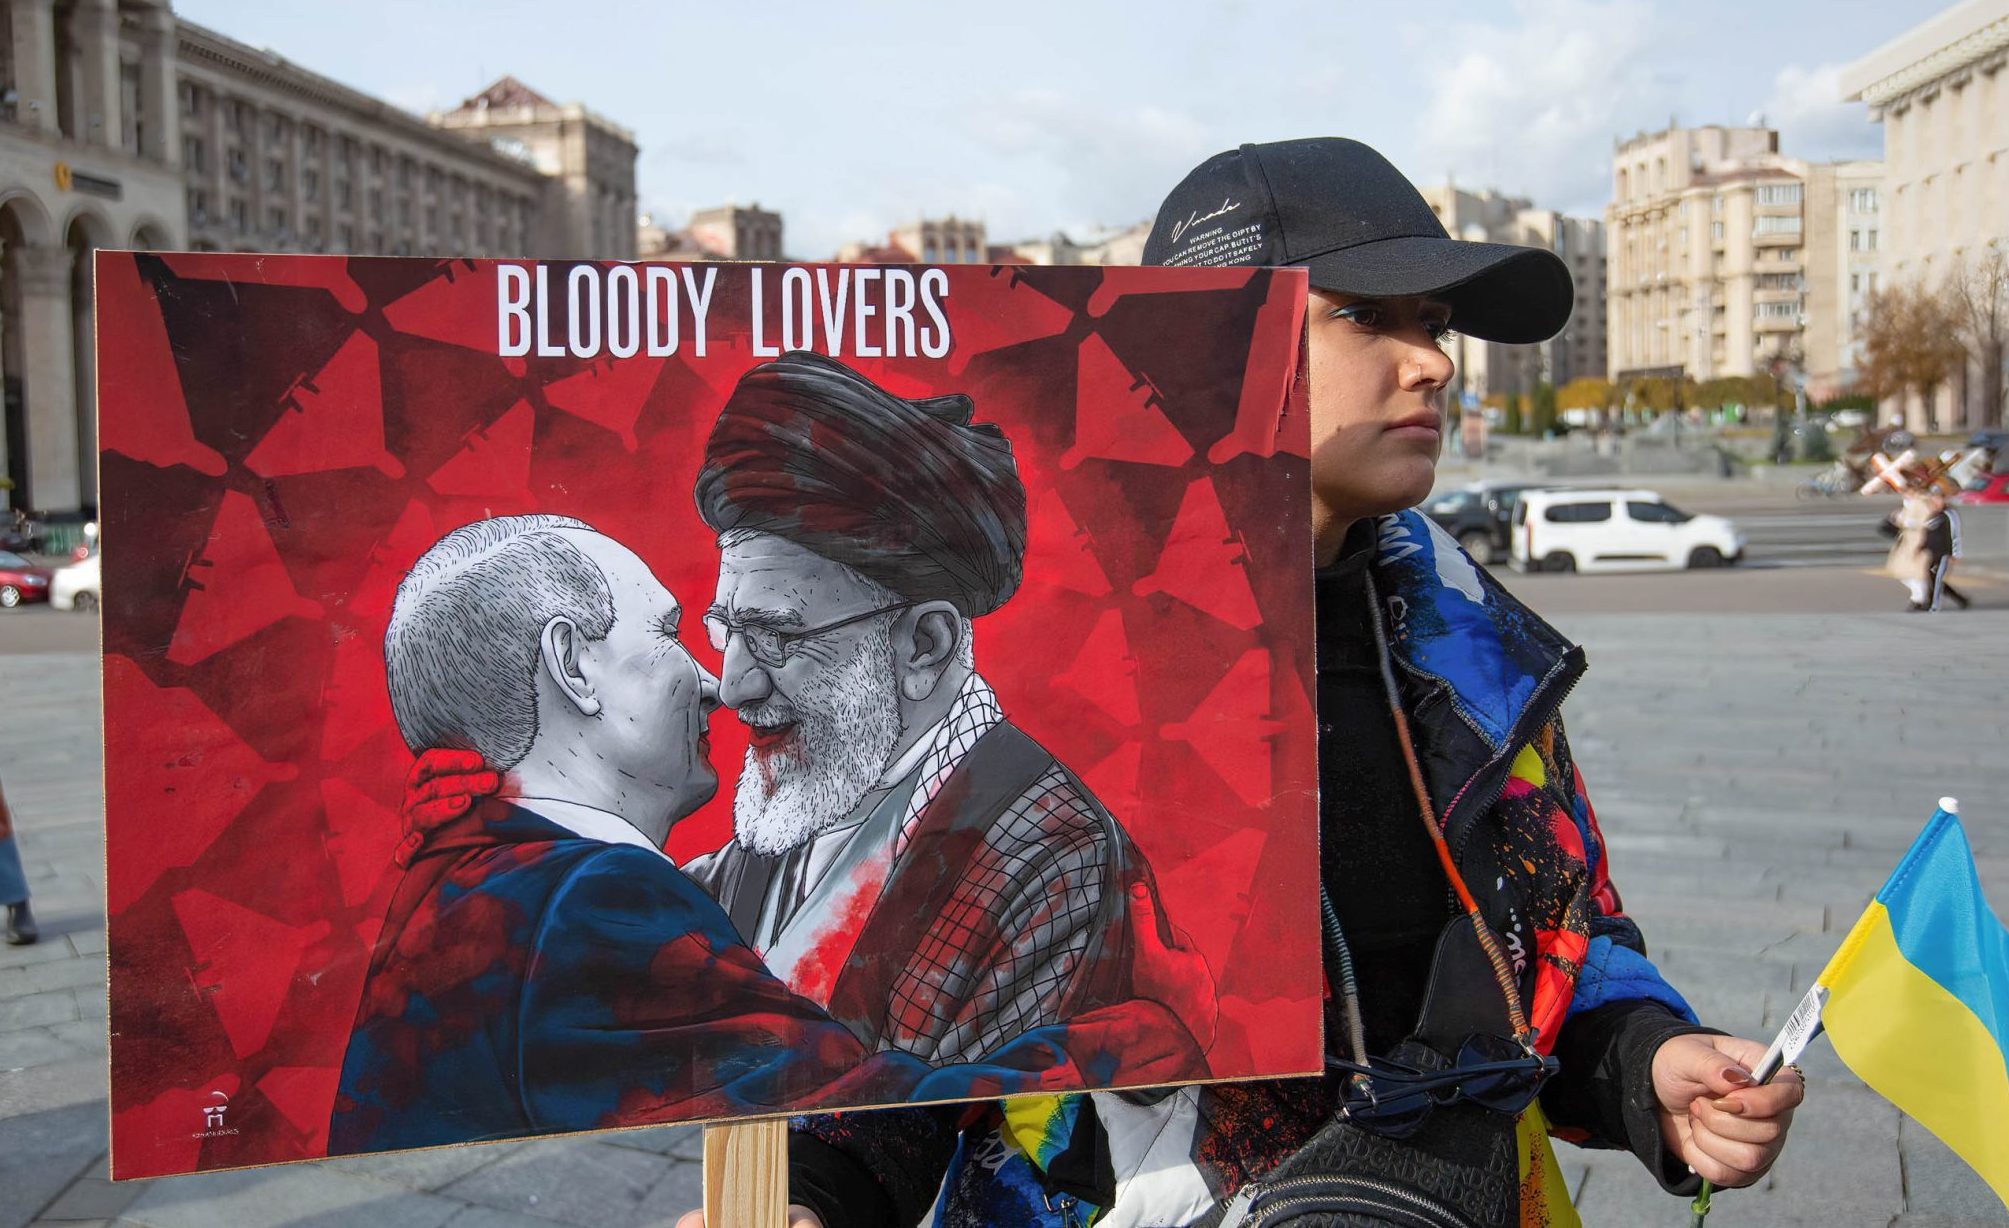 Photo: An Iranian woman who lives in Ukraine, holds a placard with the likenesses of Russian President Vladimir Putin and Iranian Supreme Leader Ali Khamenei during a protest against Iran's government and deliveries of Iranian drones to Russia in central Kyiv. Credit: Oleksii Chumachenko / SOPA Images/Sipa USA